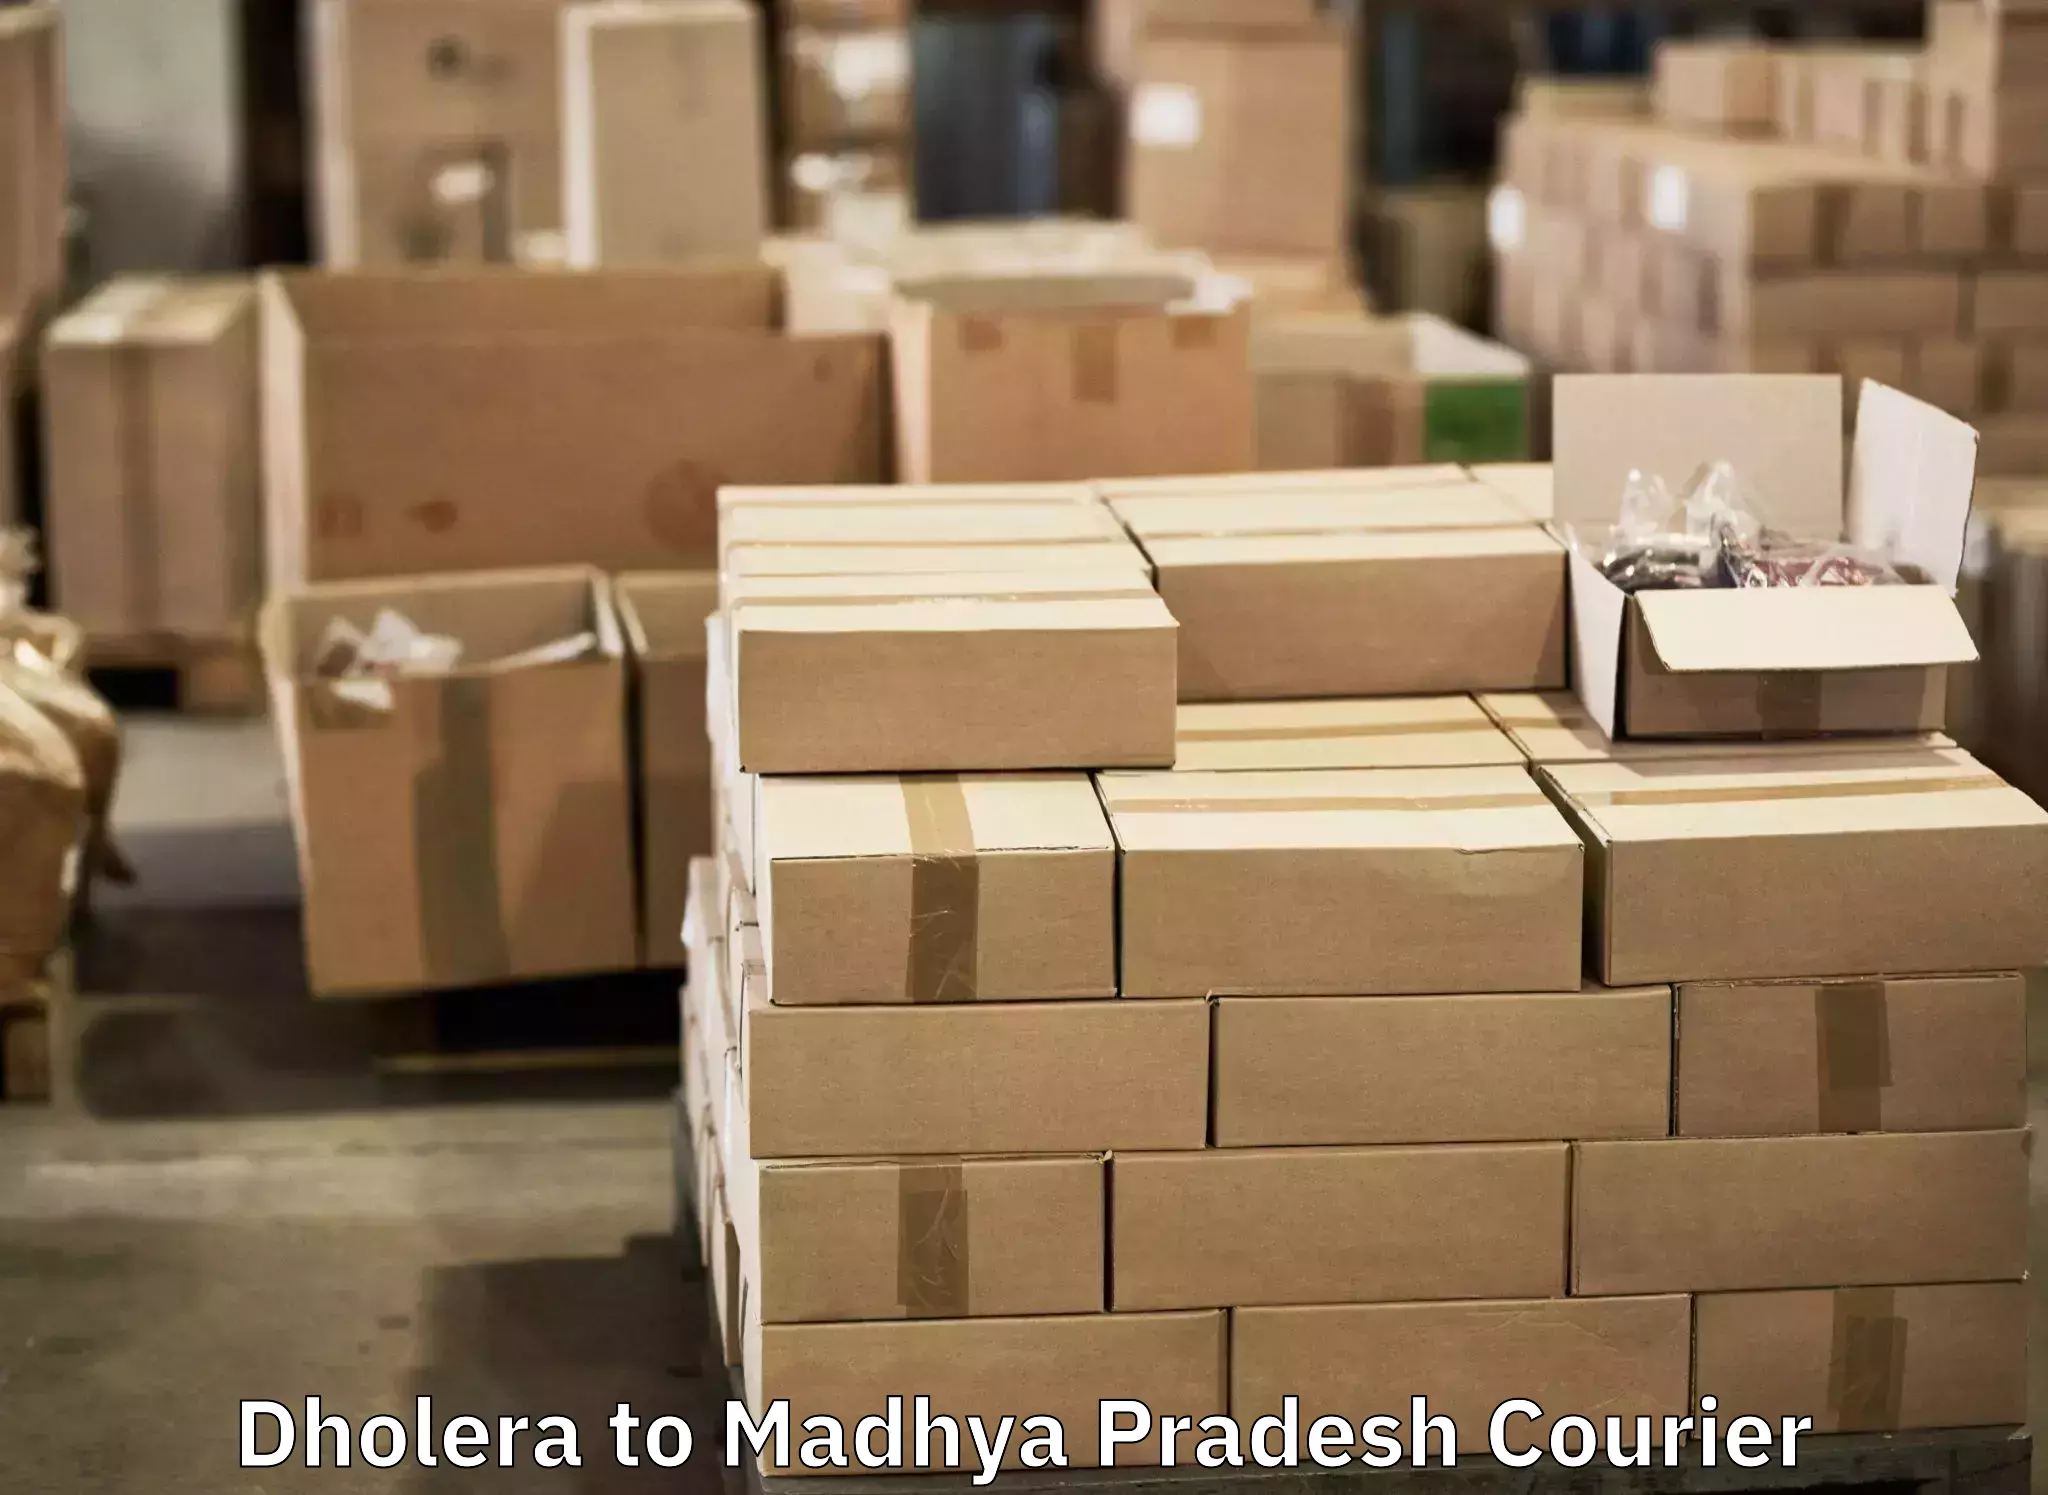 Luggage delivery network Dholera to Rajgarh